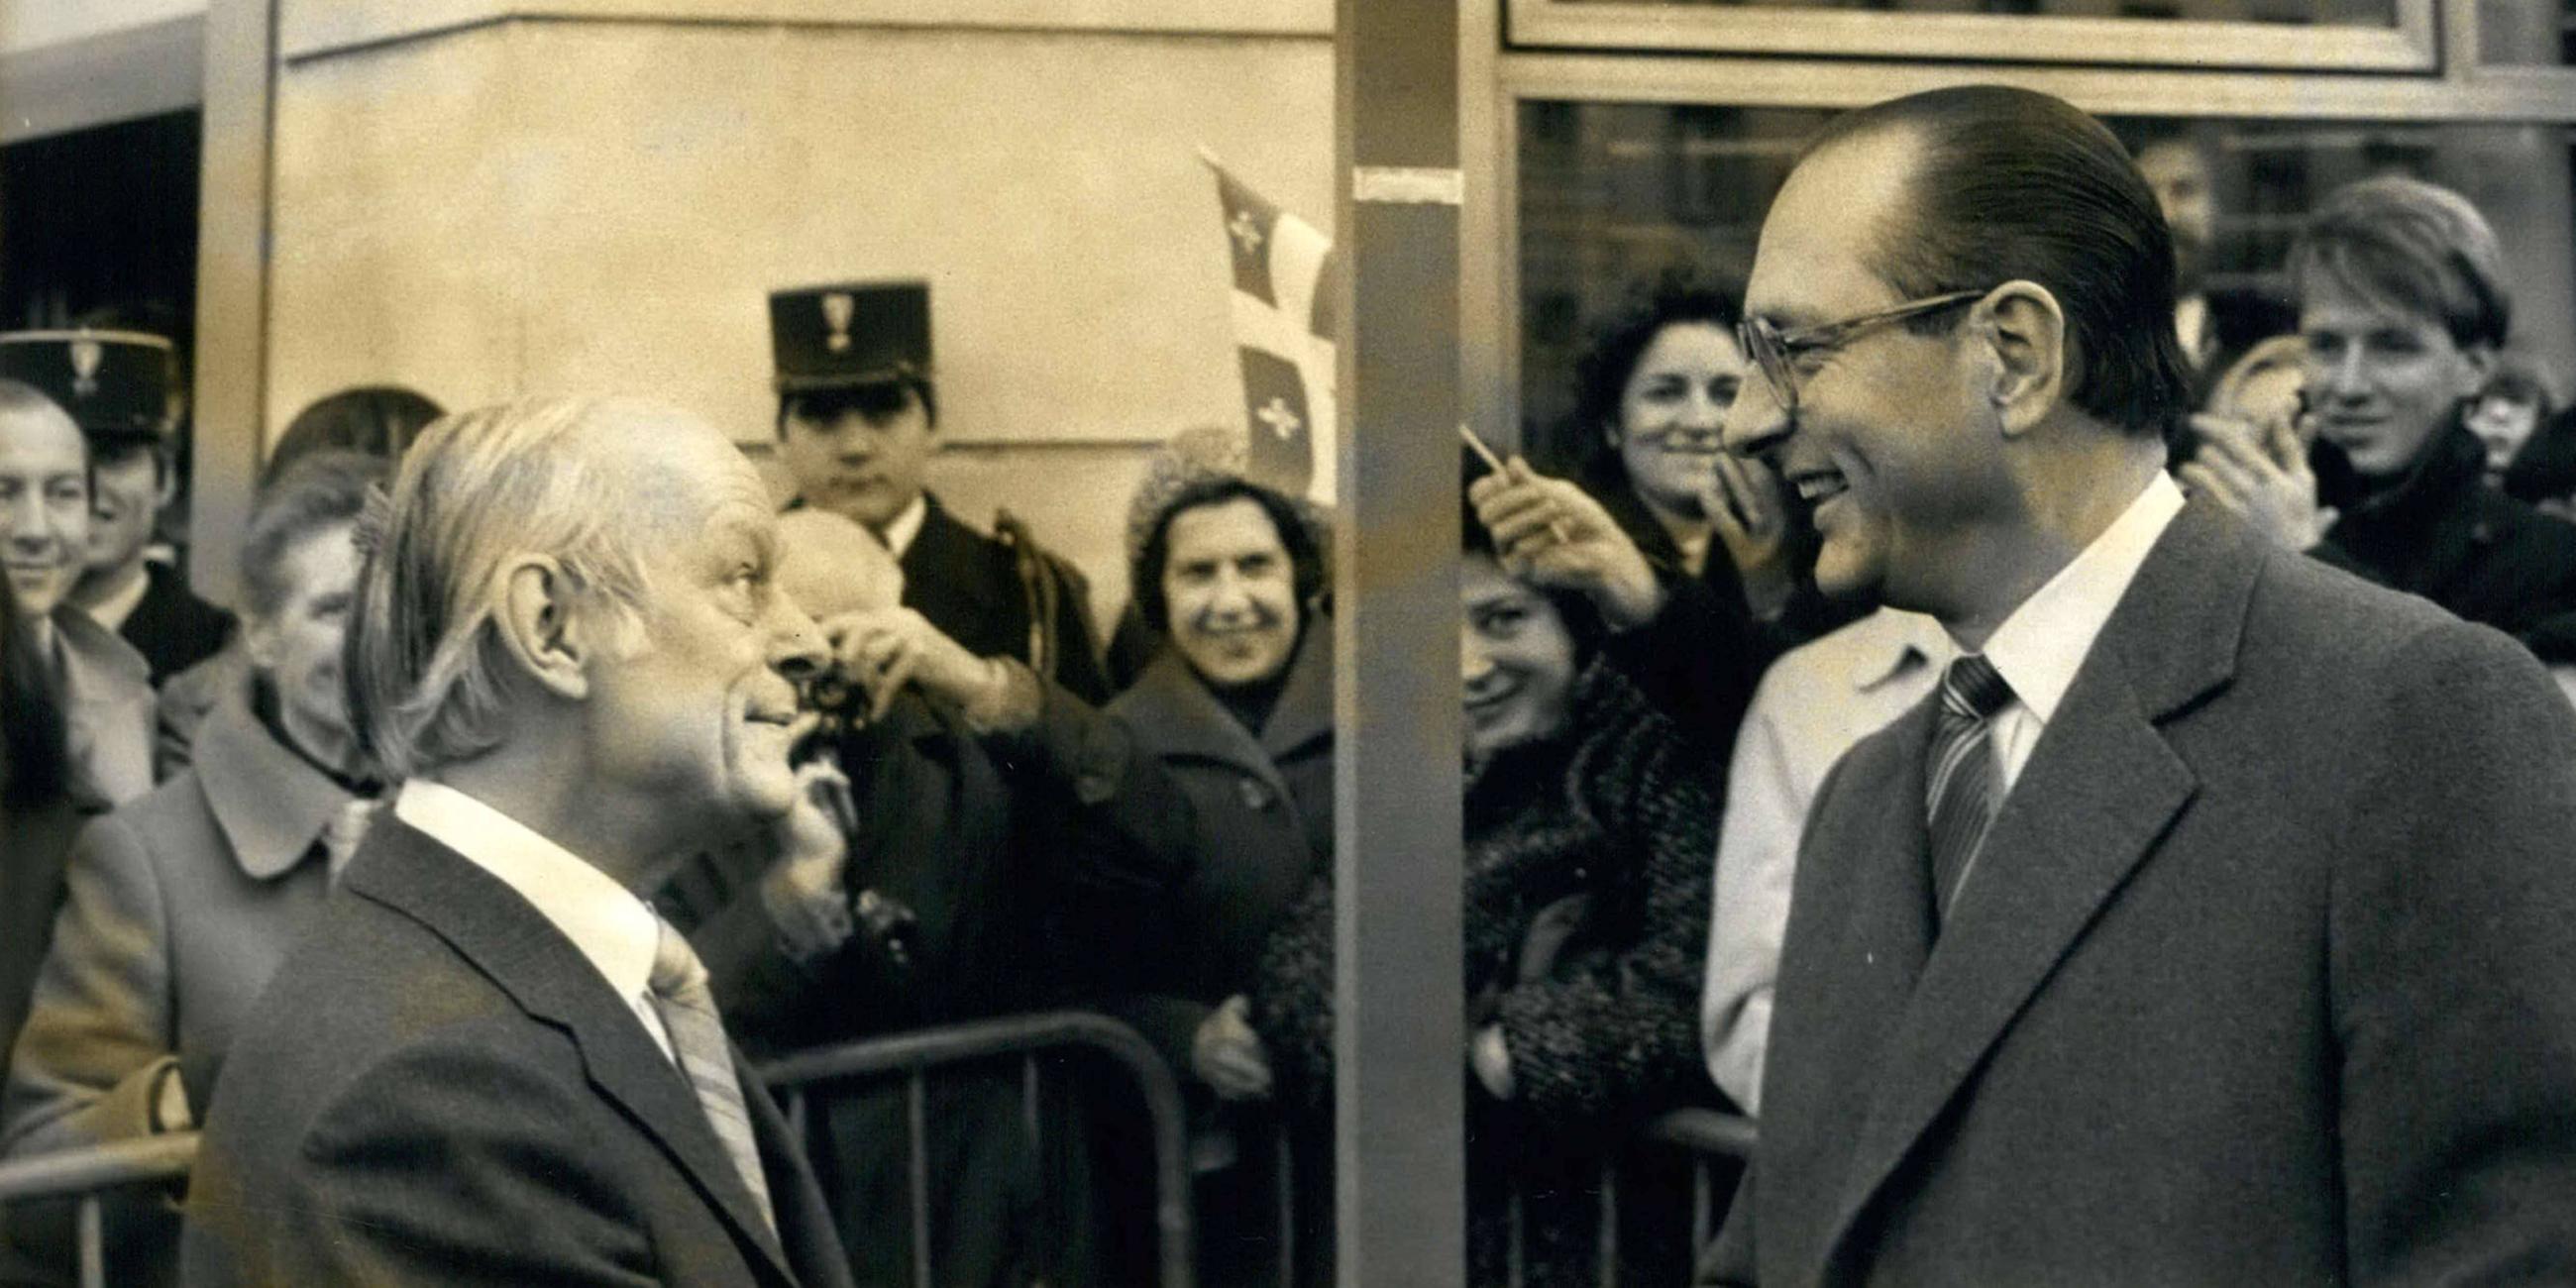 Archiv: Jacques Chirac und Rene Levesque am 17.12.1980 in Quebec